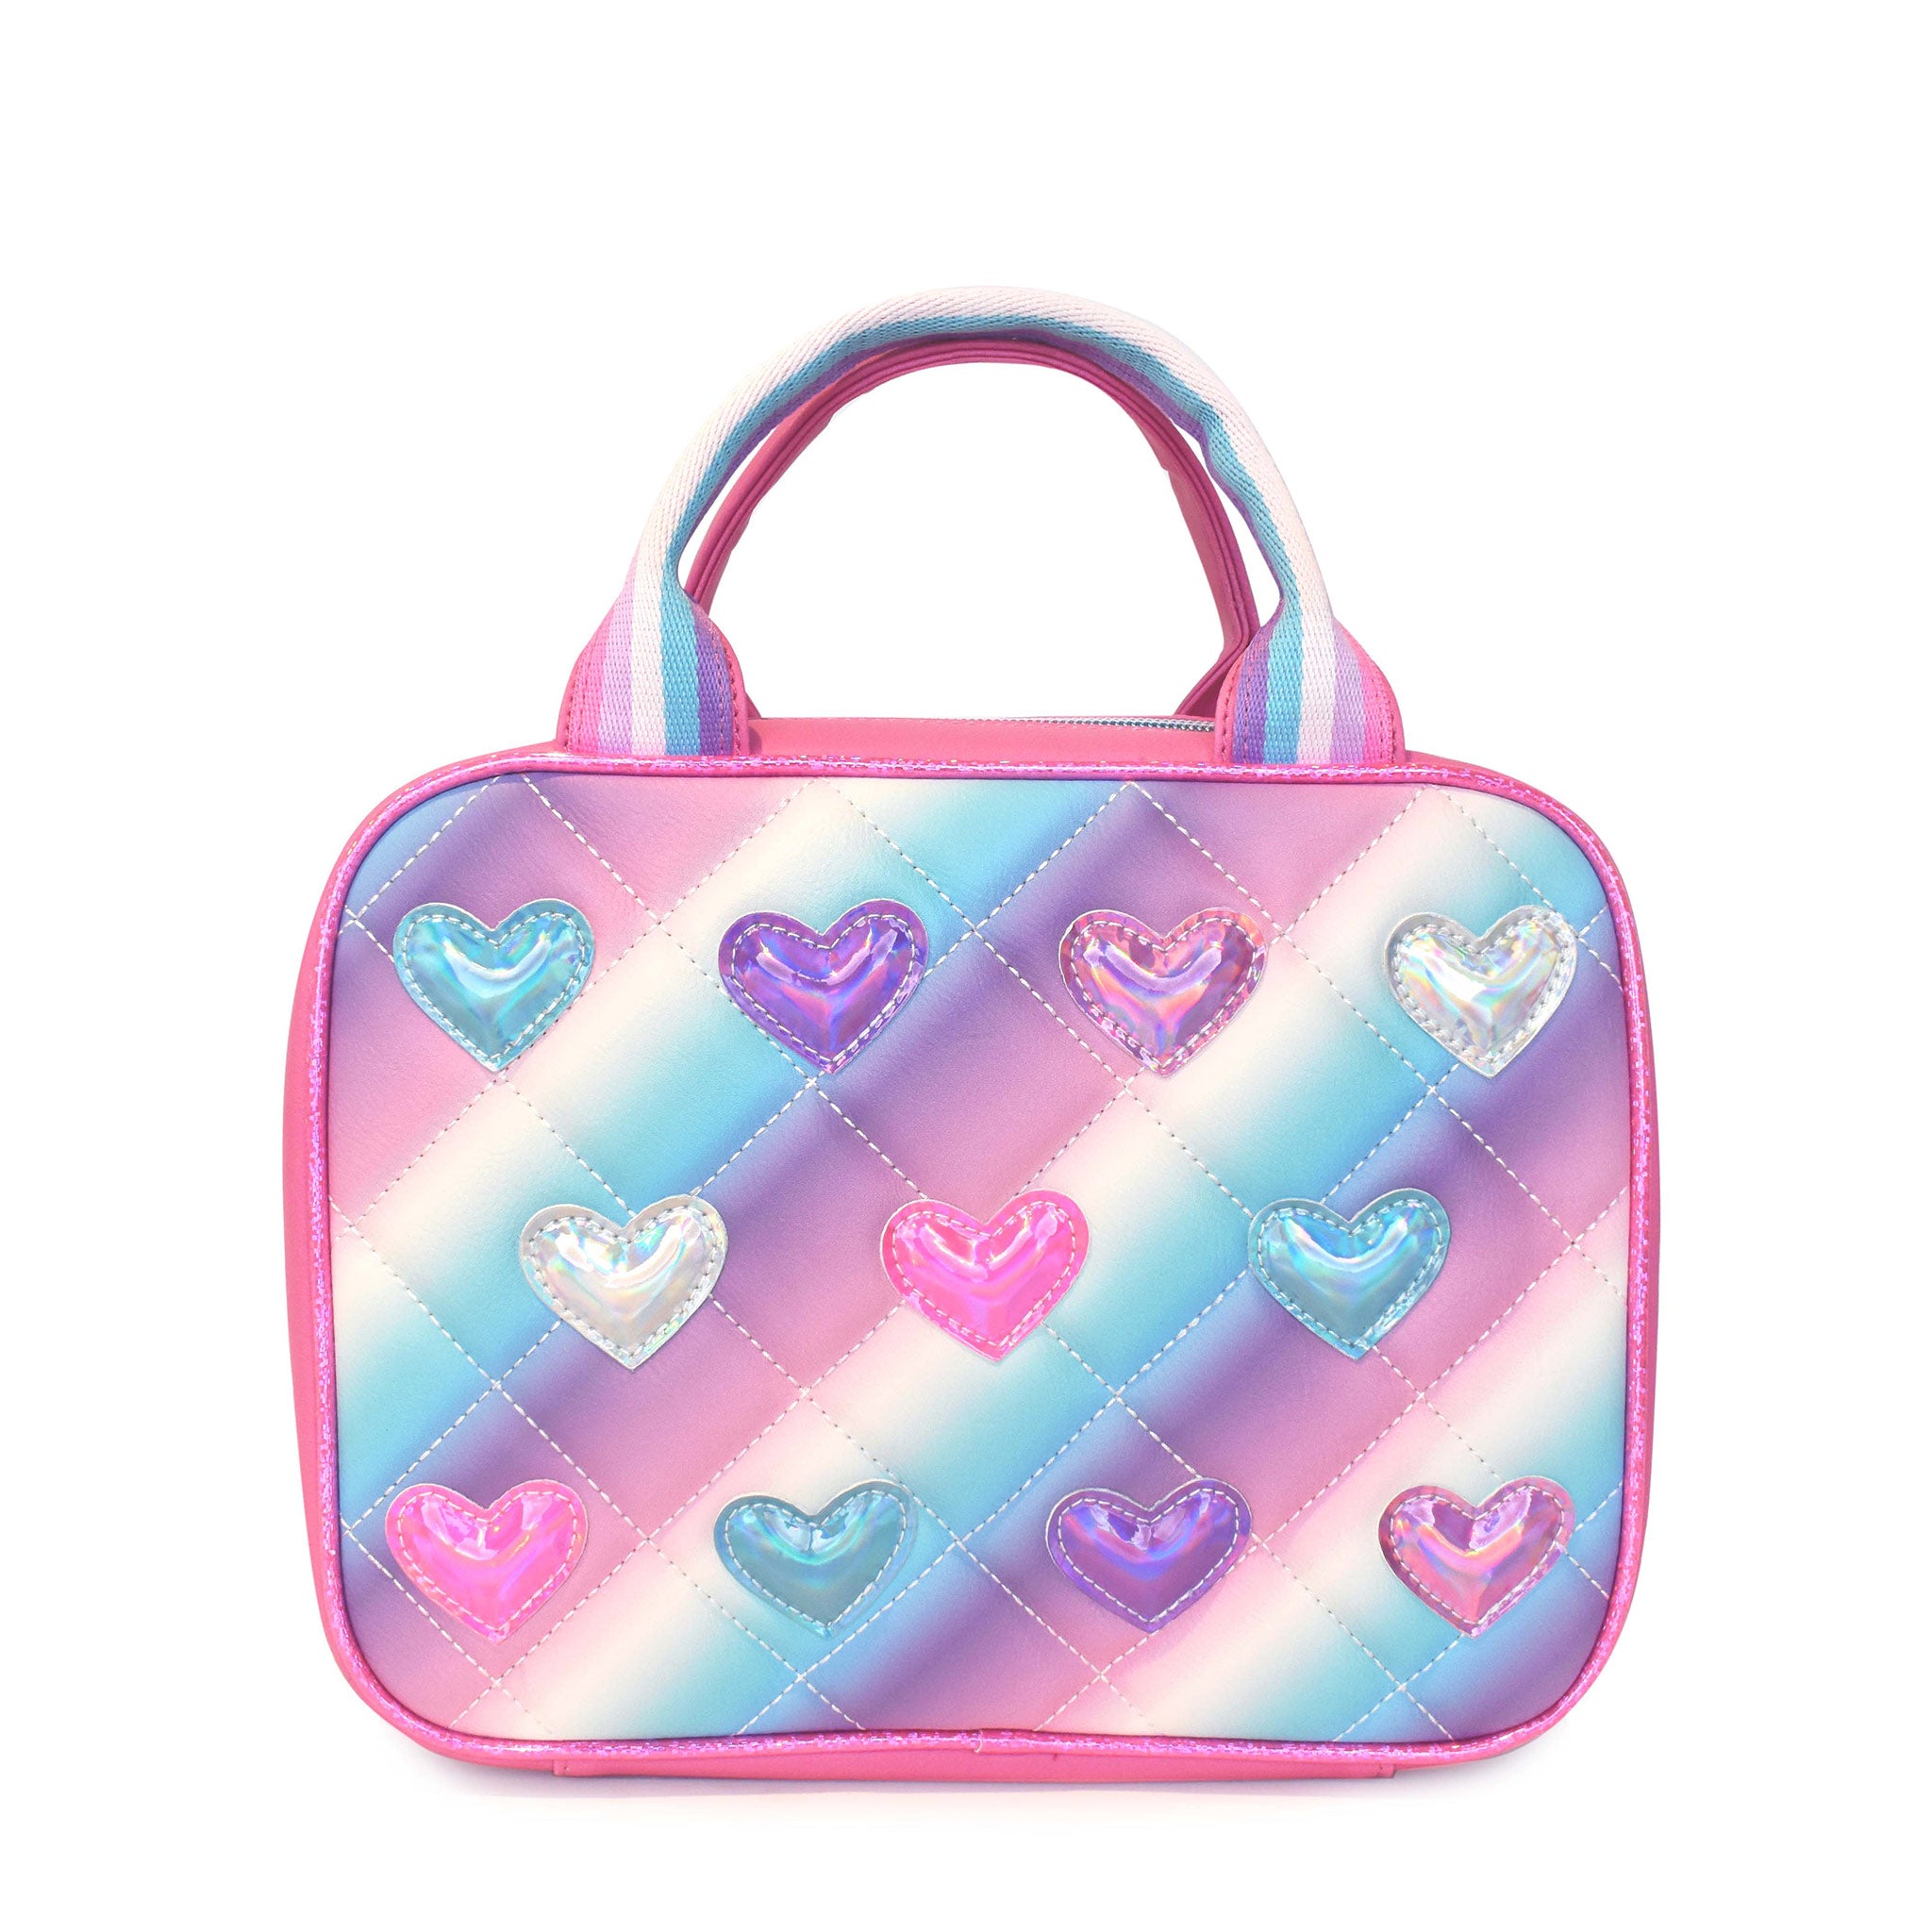 Front view of a metallic heart patched lunch bag quilted in a cool pastel ombre